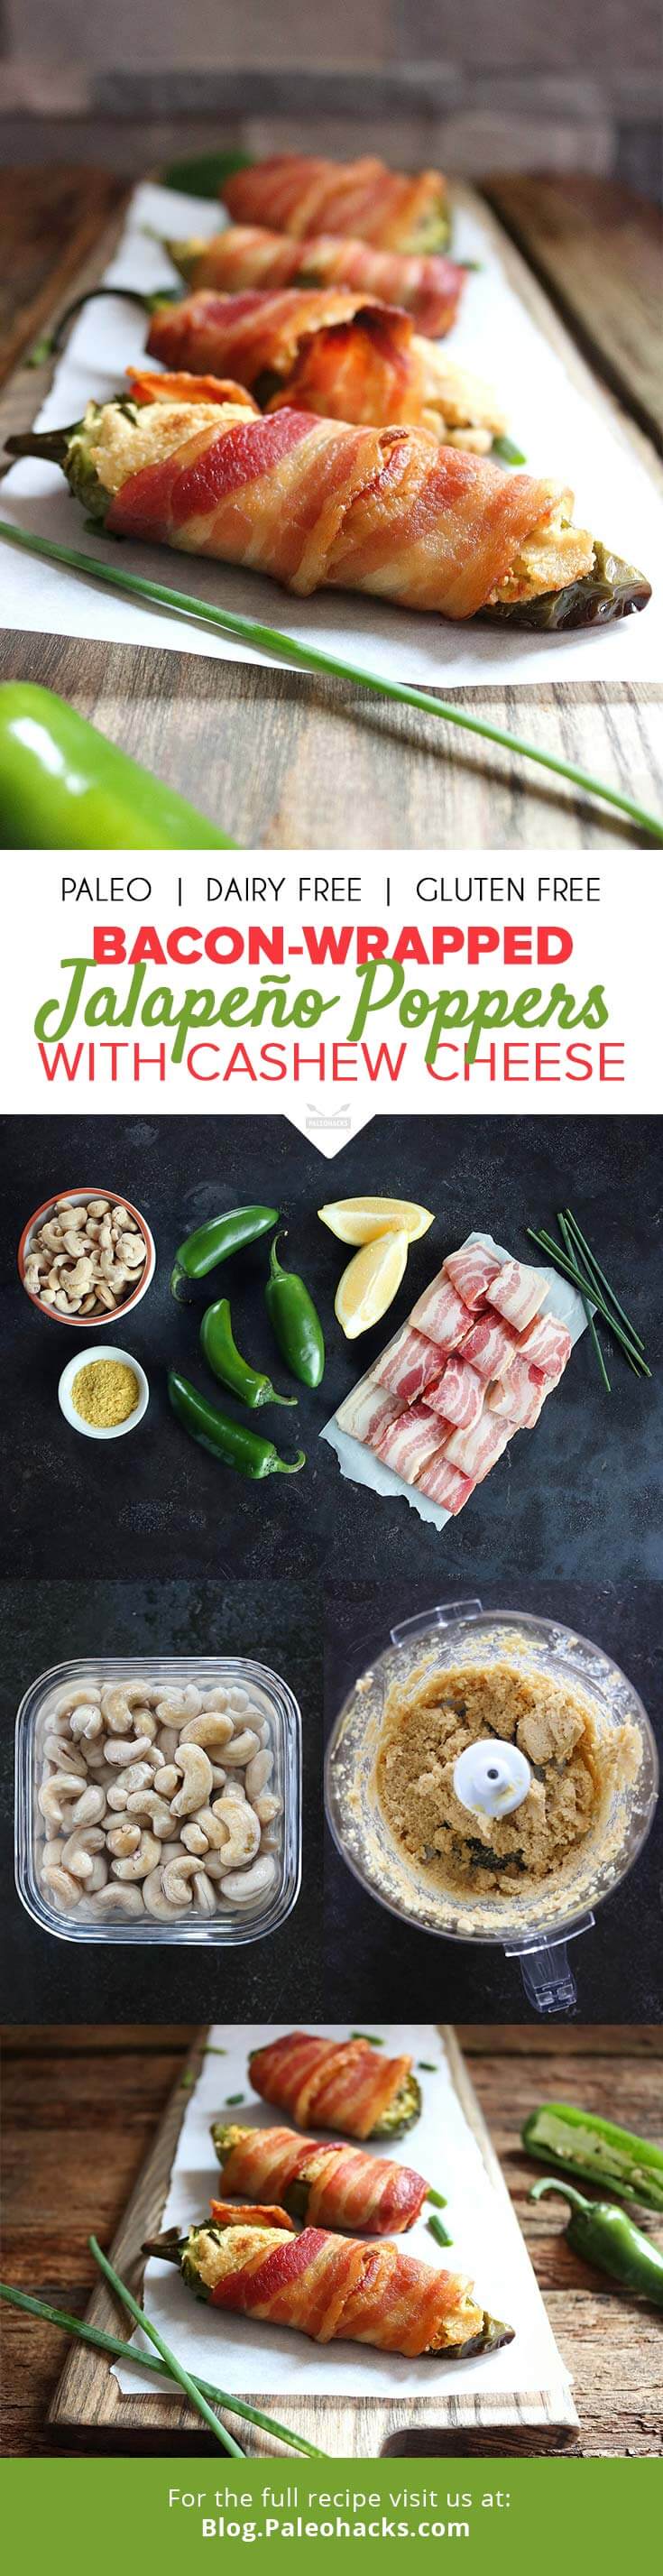 bacon-wrapped jalapeno poppers pin